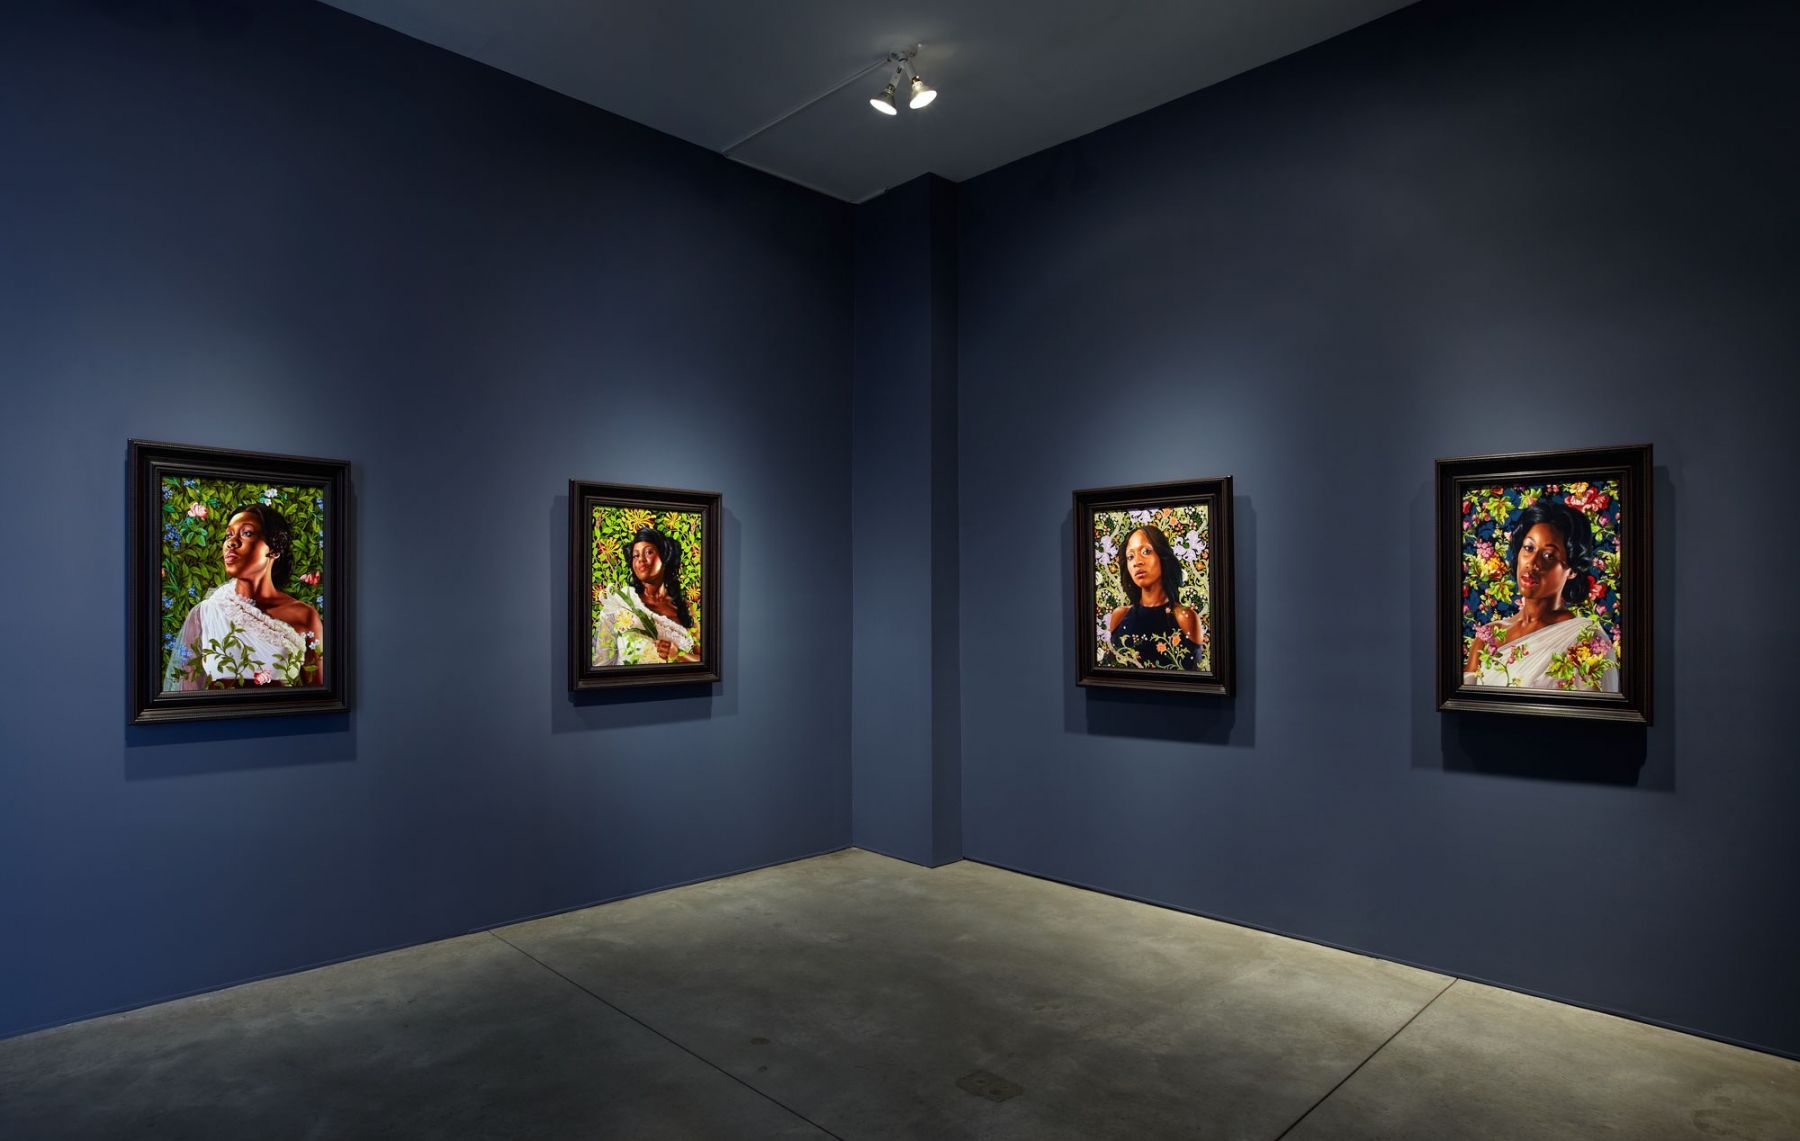 Kehinde Wiley | An Economy of Grace, Sean Kelly Gallery, New York City, USA, May 6 - June 16, 2012 | 8